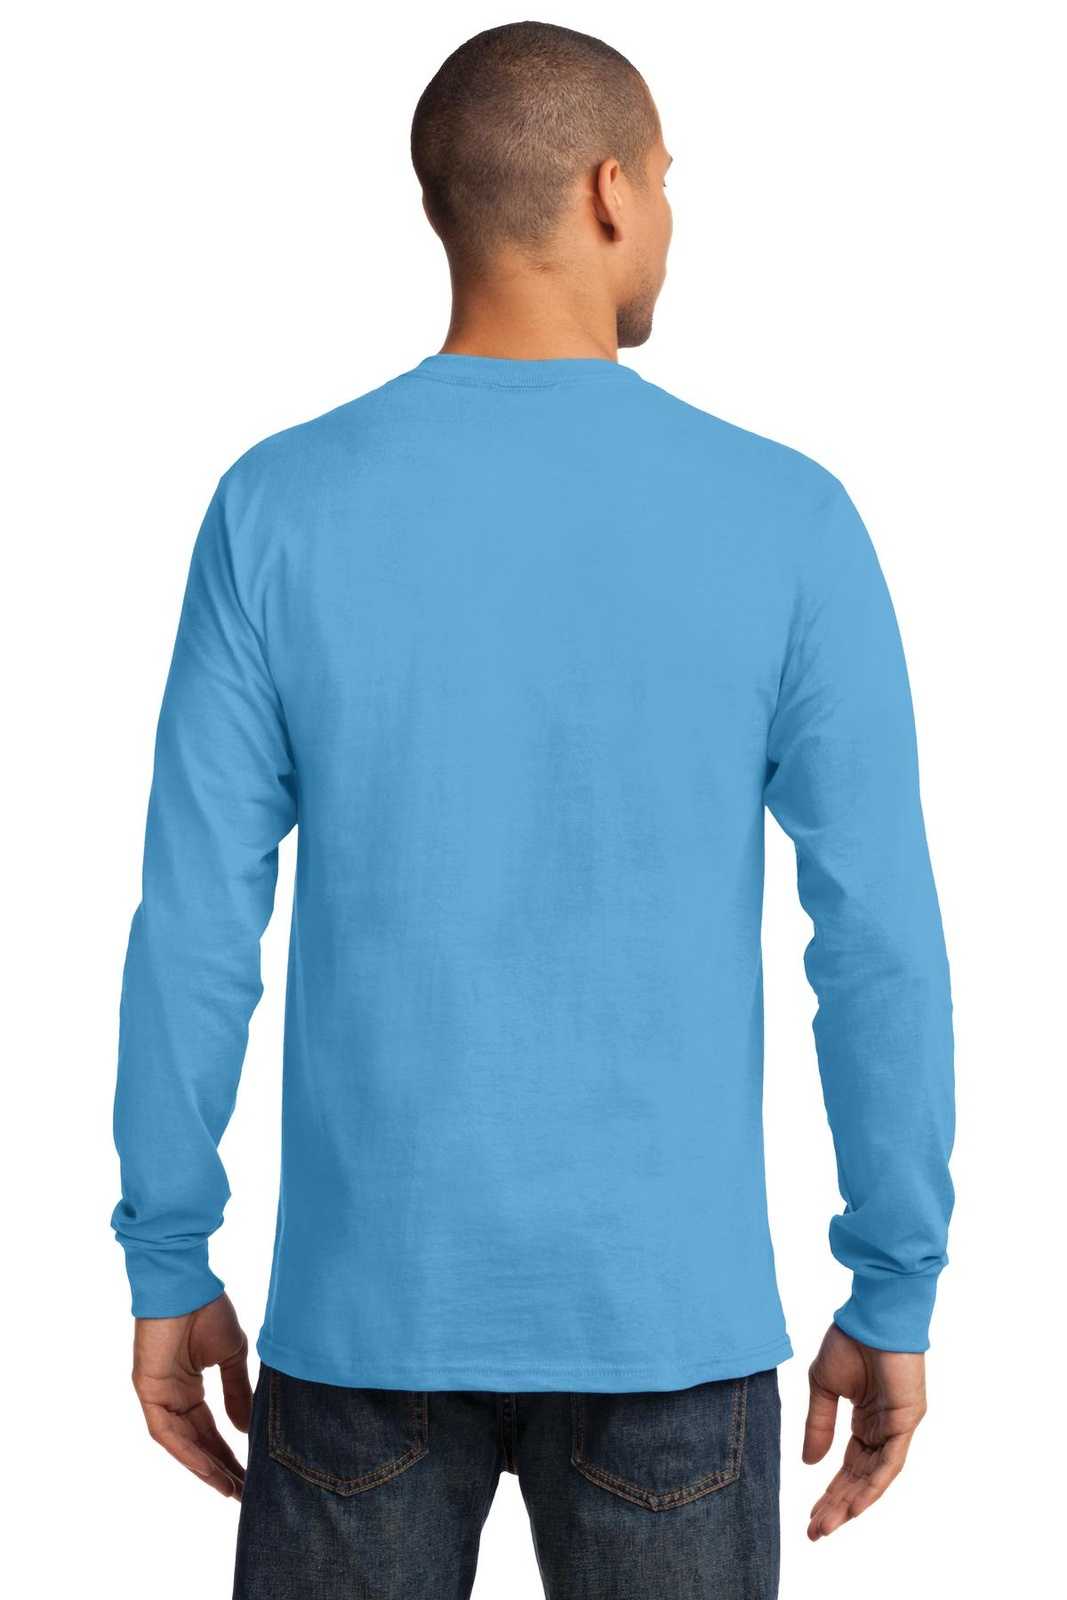 Port & Company PC61LST Tall Long Sleeve Essential Tee - Aquatic Blue - HIT a Double - 1